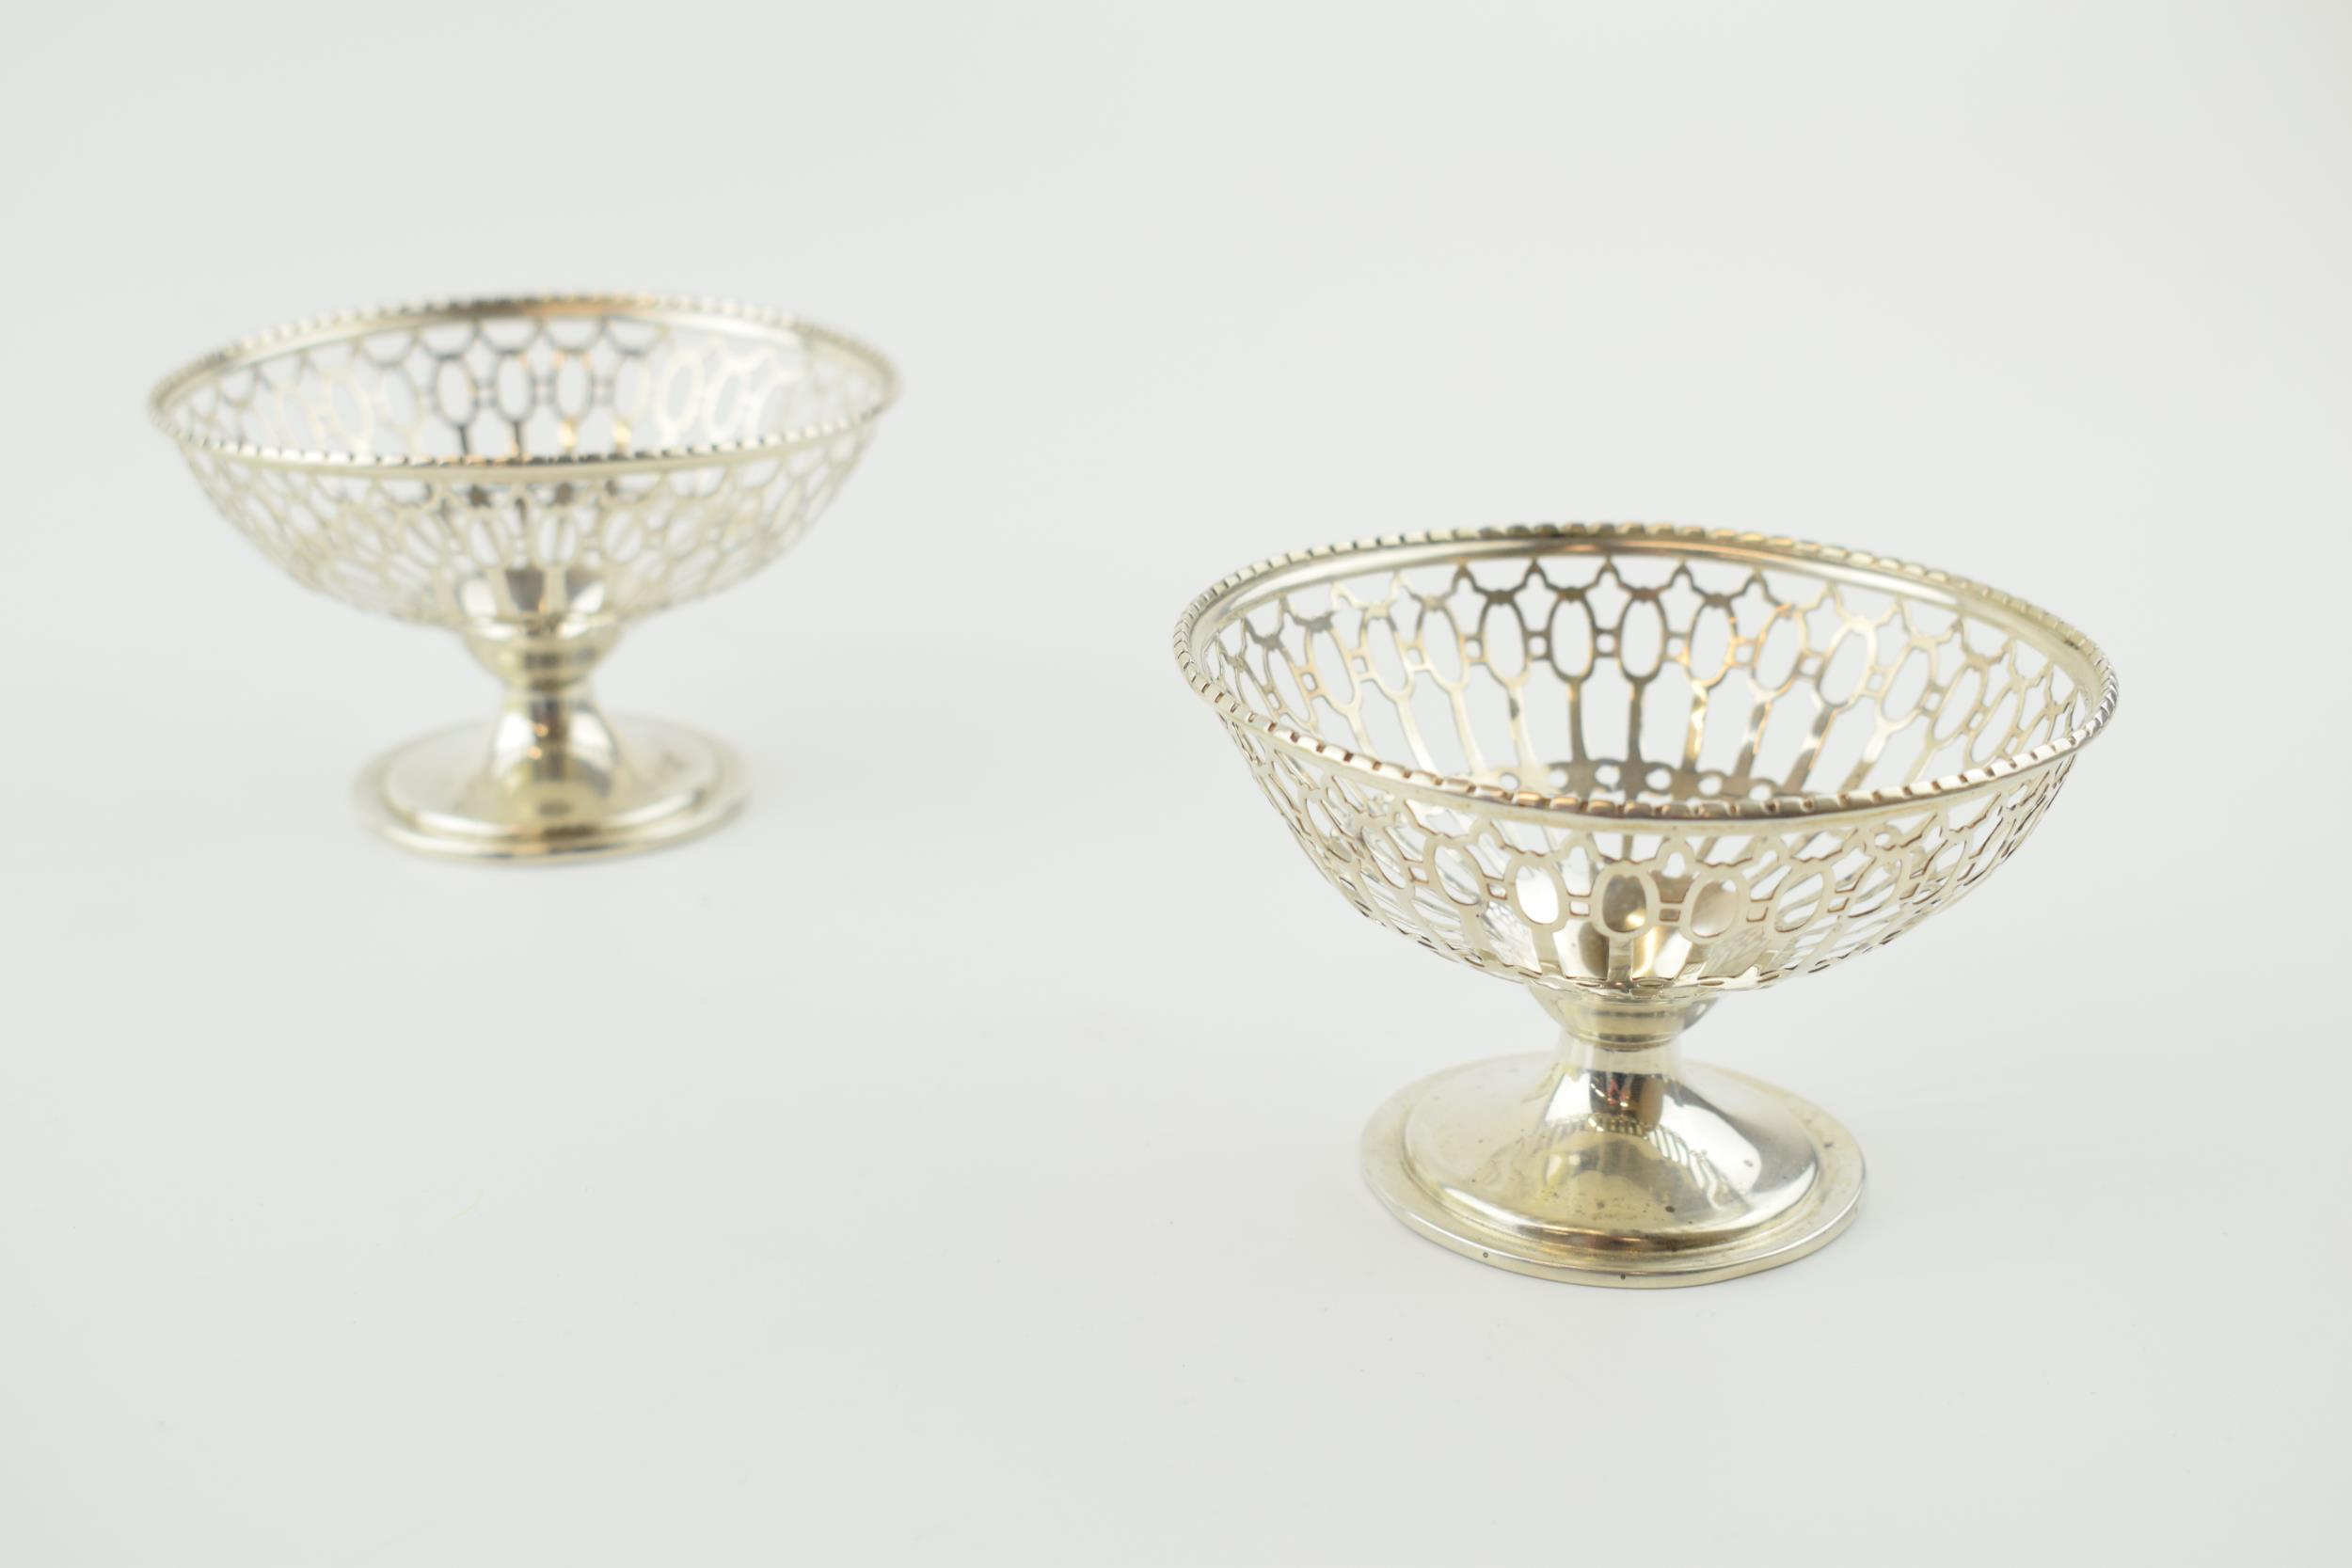 A pair of silver bon bon dishes with ornate pierced decoration, Birm 1921, E S Barnsley, 76.8 - Image 2 of 3